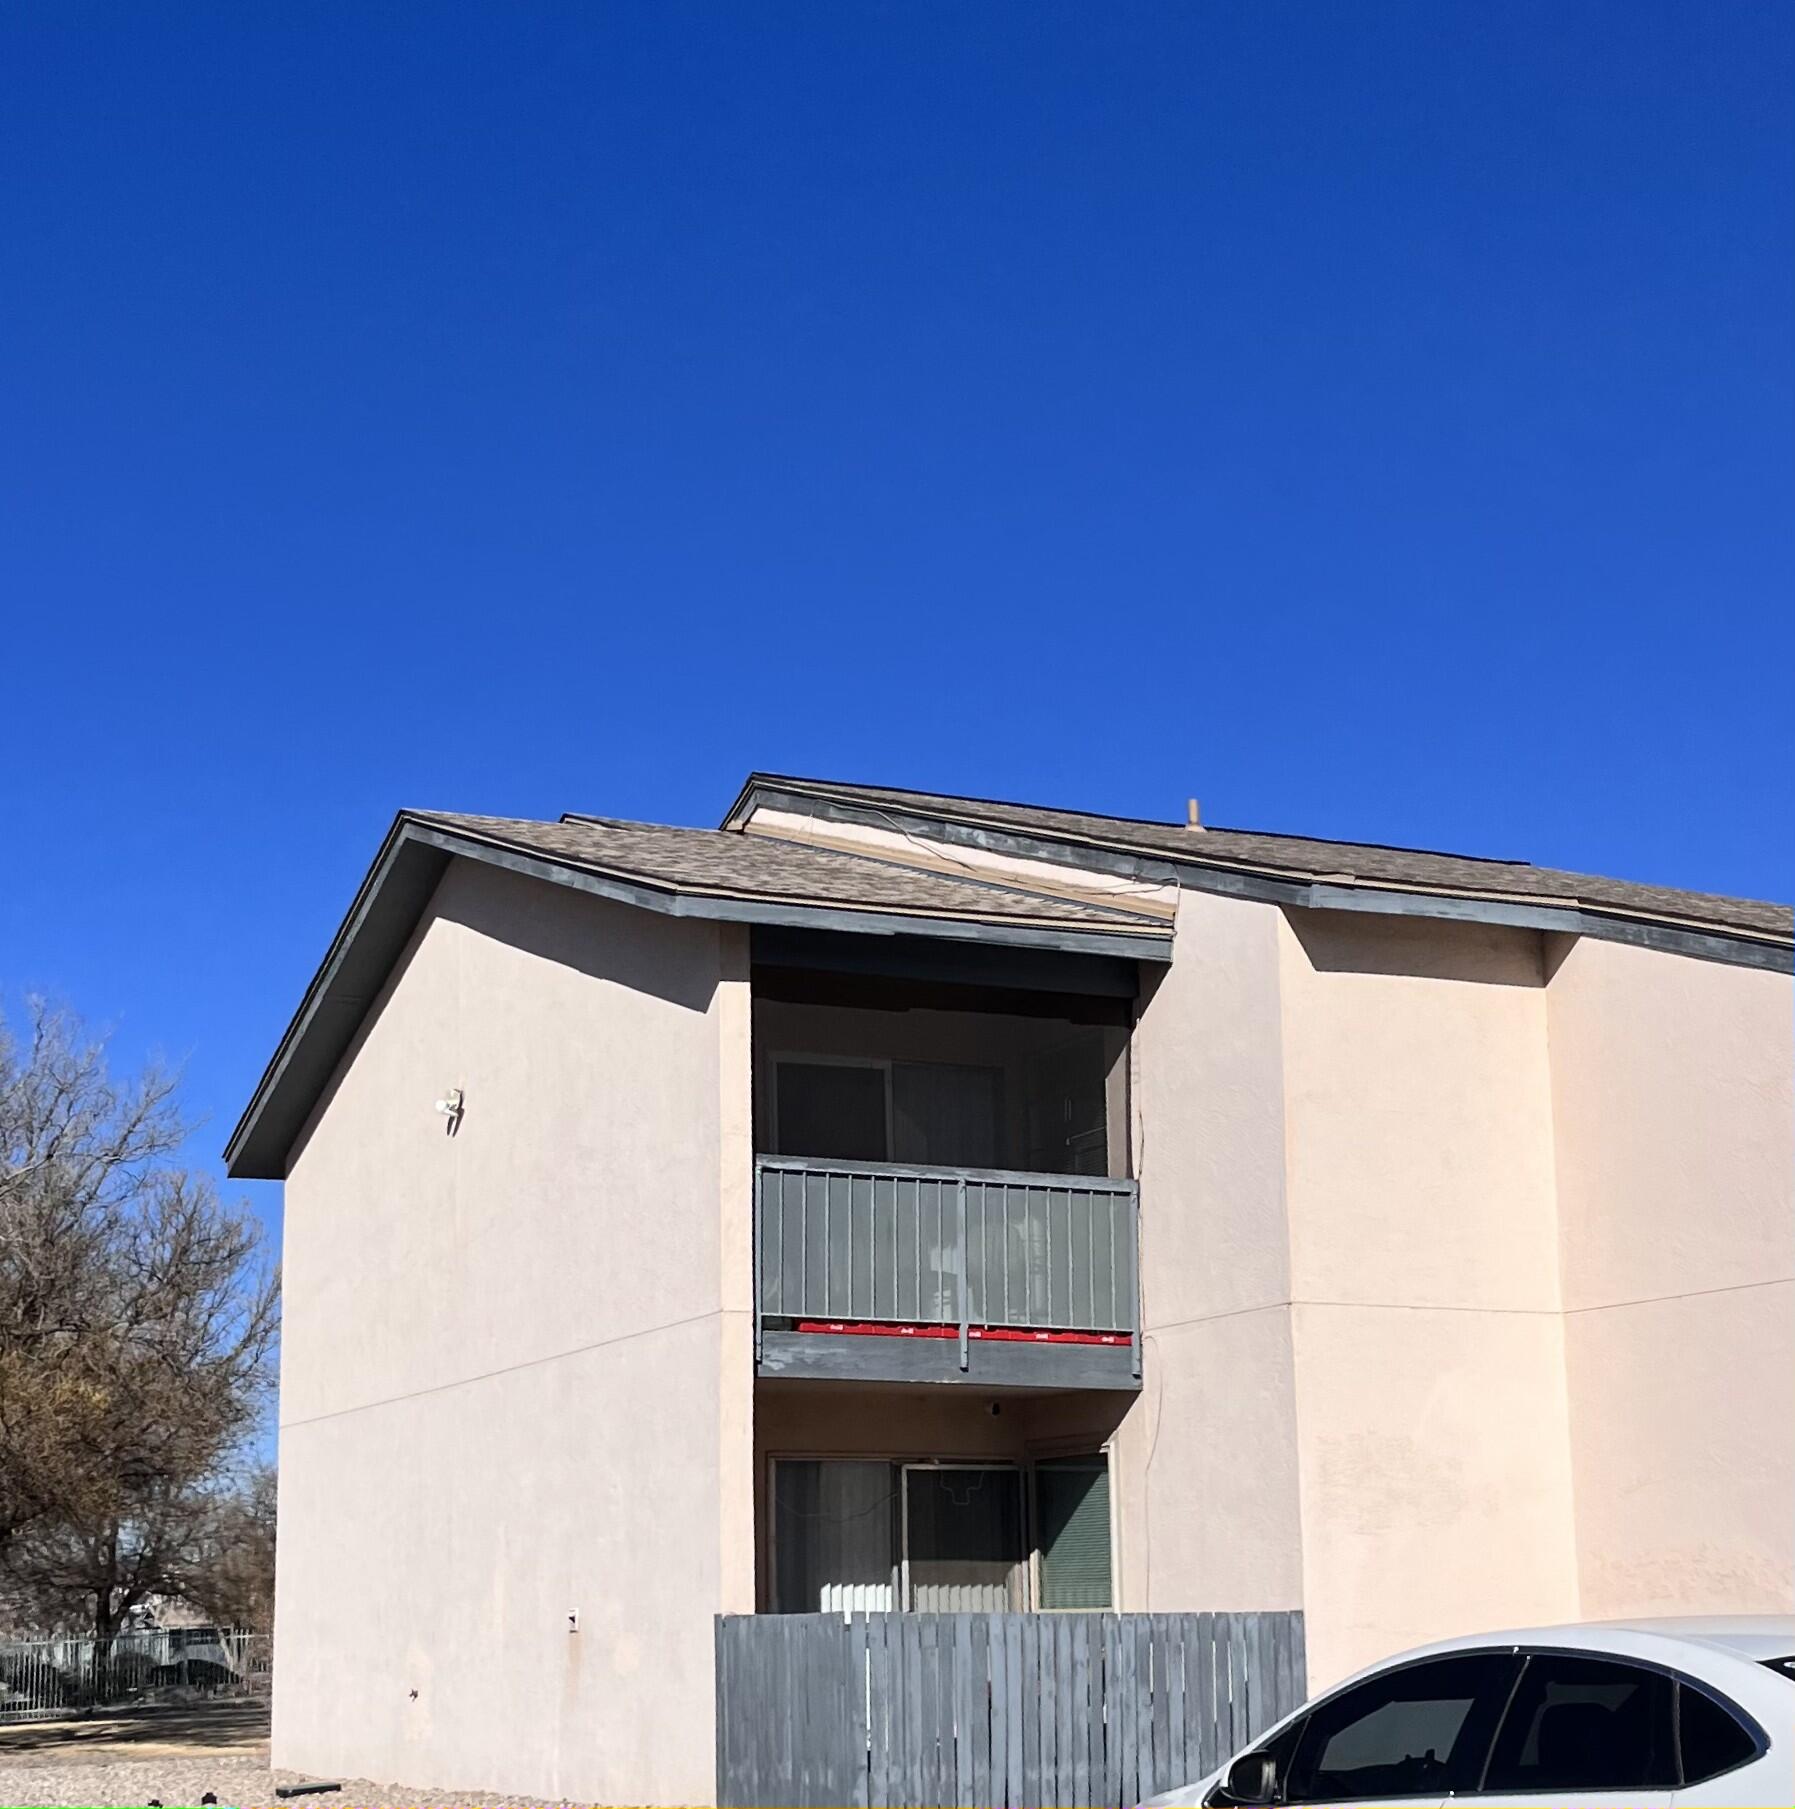 Great Starter or investment property available for purchase. 3 decent sized bedrooms 2 full bathrooms! Sliding glass door leading to the covered Balcony off the dinning area. Conveniently located. Close to I-25 and shopping areas!